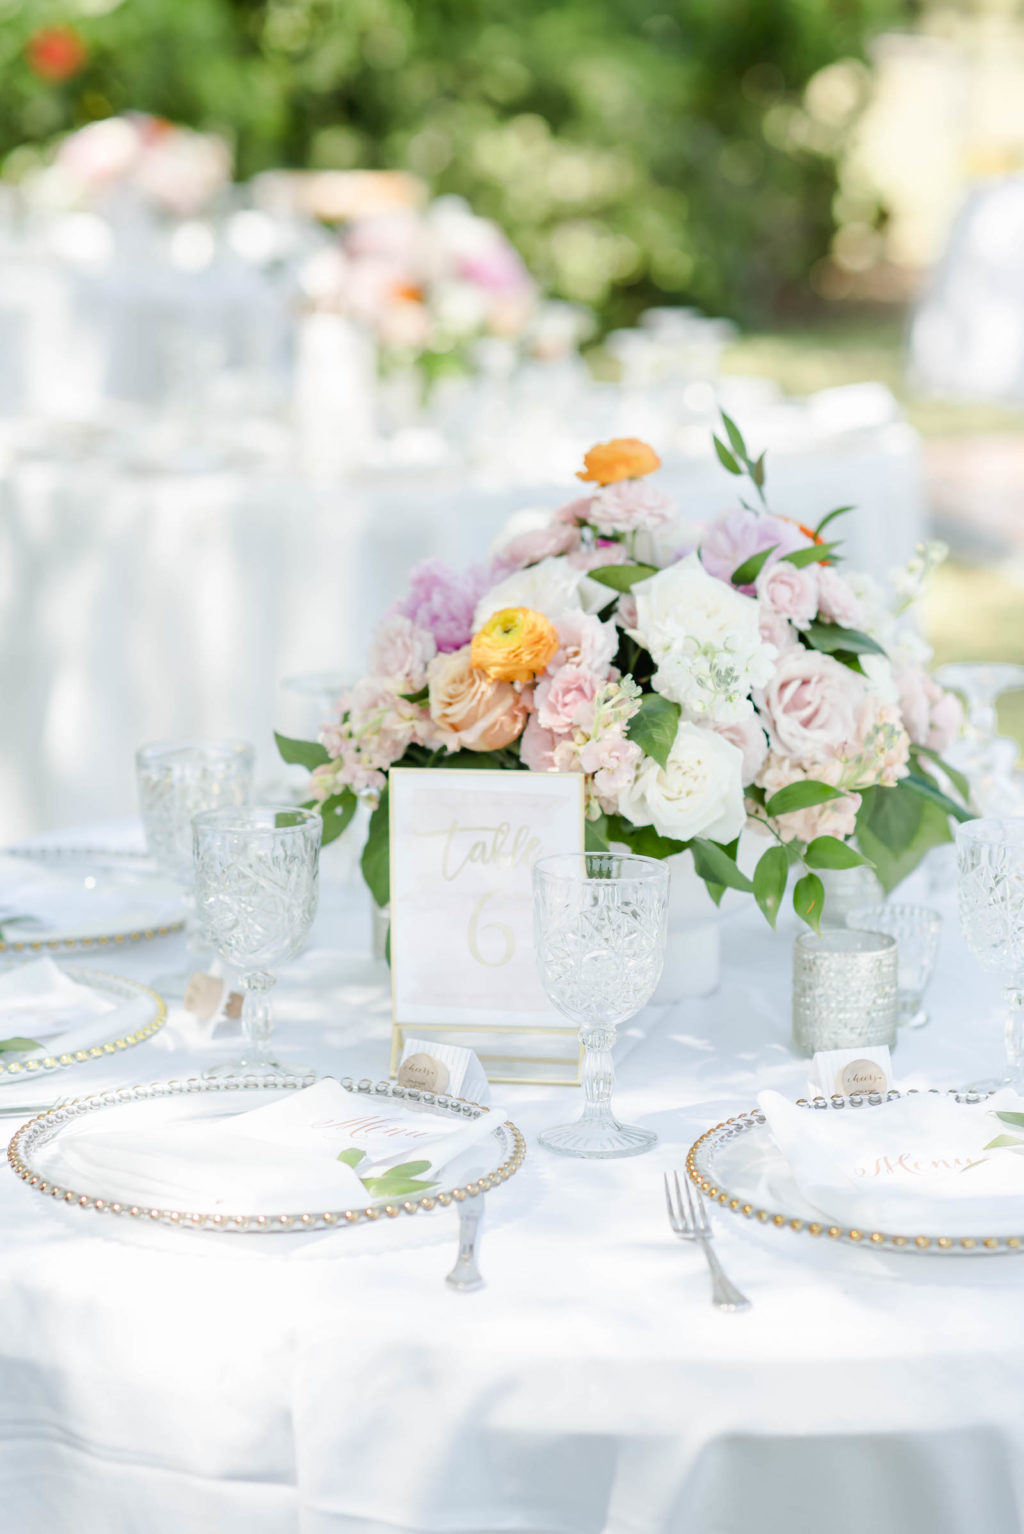 Pastel White and Blush Pink Rose Centerpiece with Greenery and Clear Glass Beaded Wedding Chargers | Romantic Garden Wedding Reception Ideas | Tampa Bay Rental Company Outside the Box Event Rentals